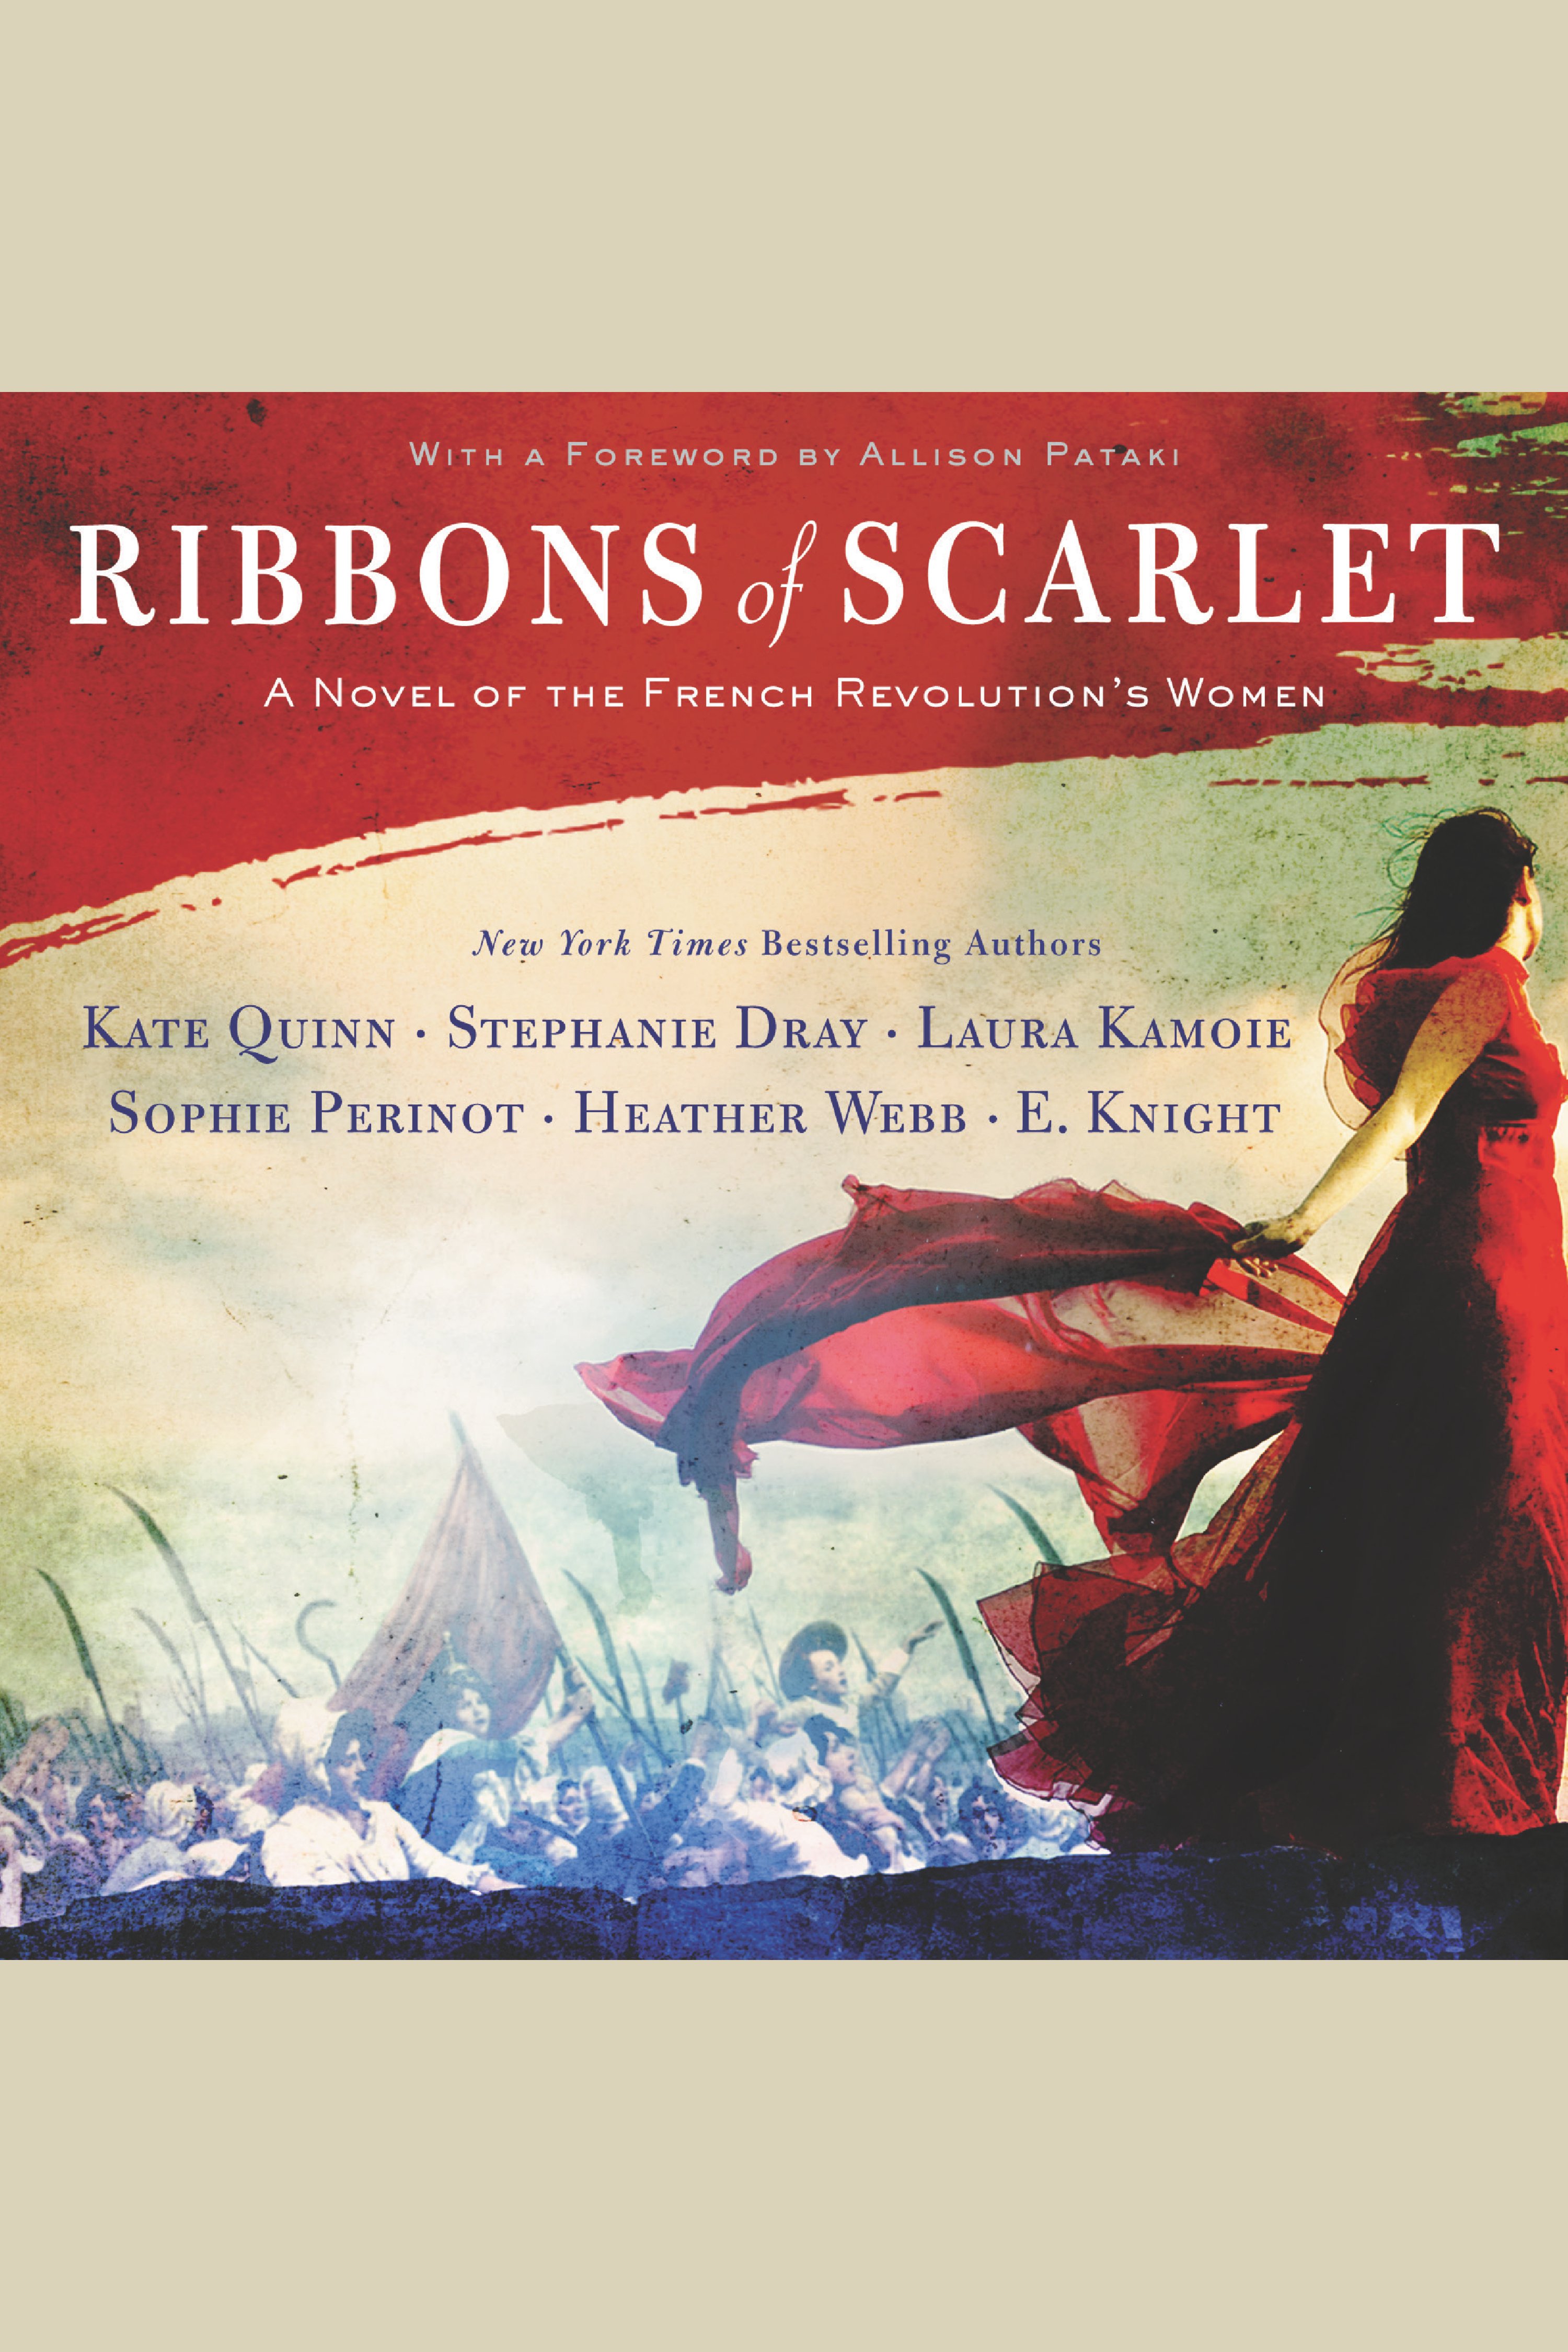 Image de couverture de Ribbons of Scarlet [electronic resource] : A Novel of the French Revolution's Women